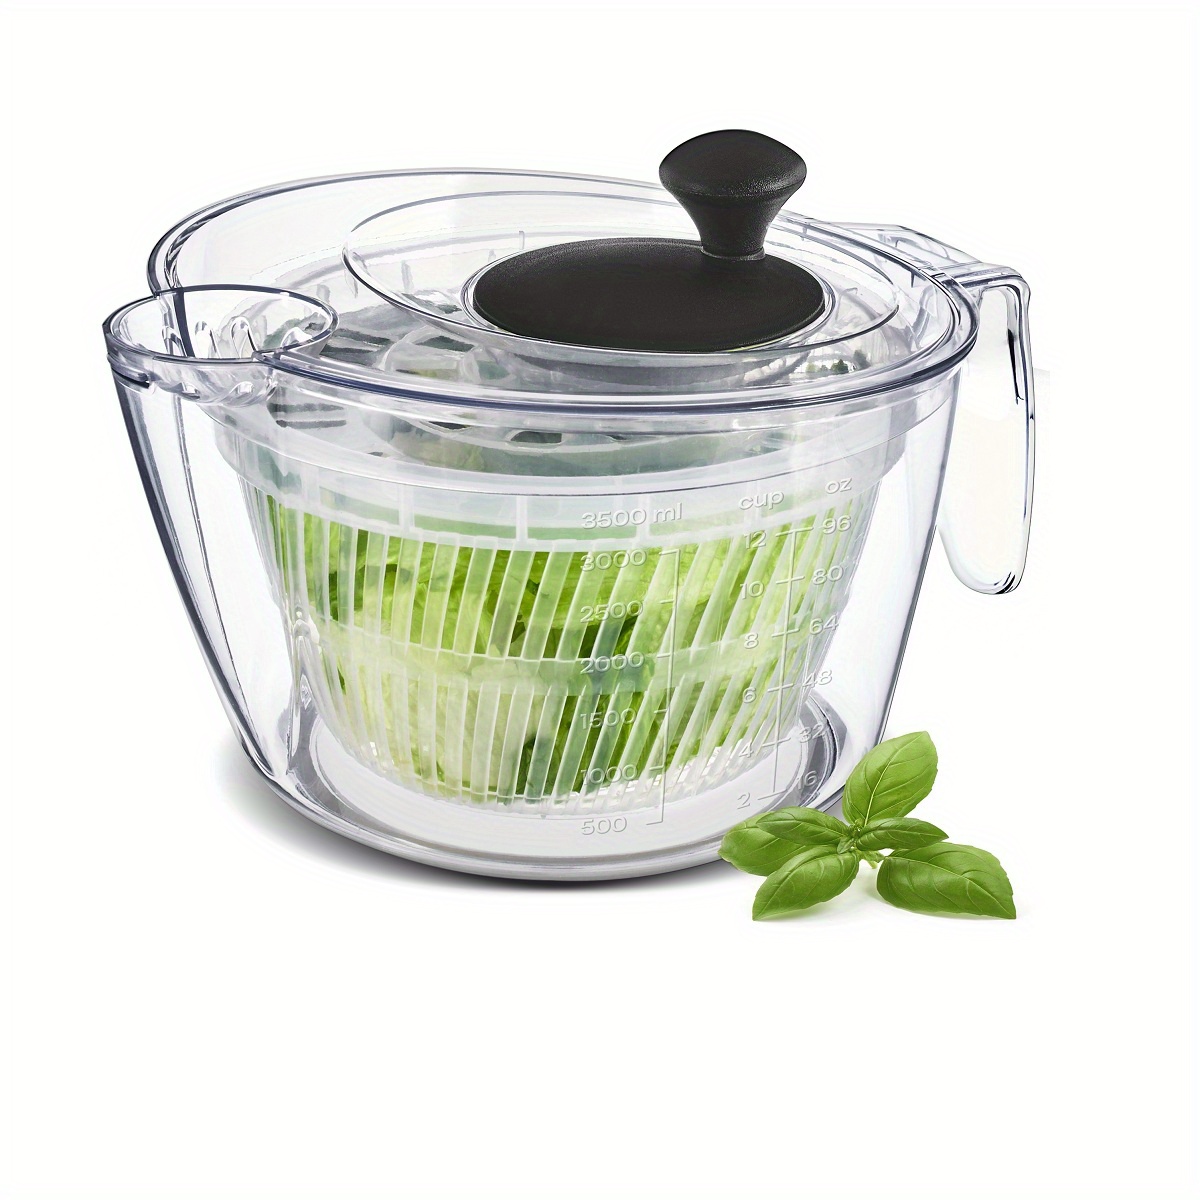 Joined Small Salad Spinner with Rotary Handle, Measuring Jug and Colander -  Quick and Easy Multi-Use Lettuce Spinner, Vegetable Dryer, Fruit Washer